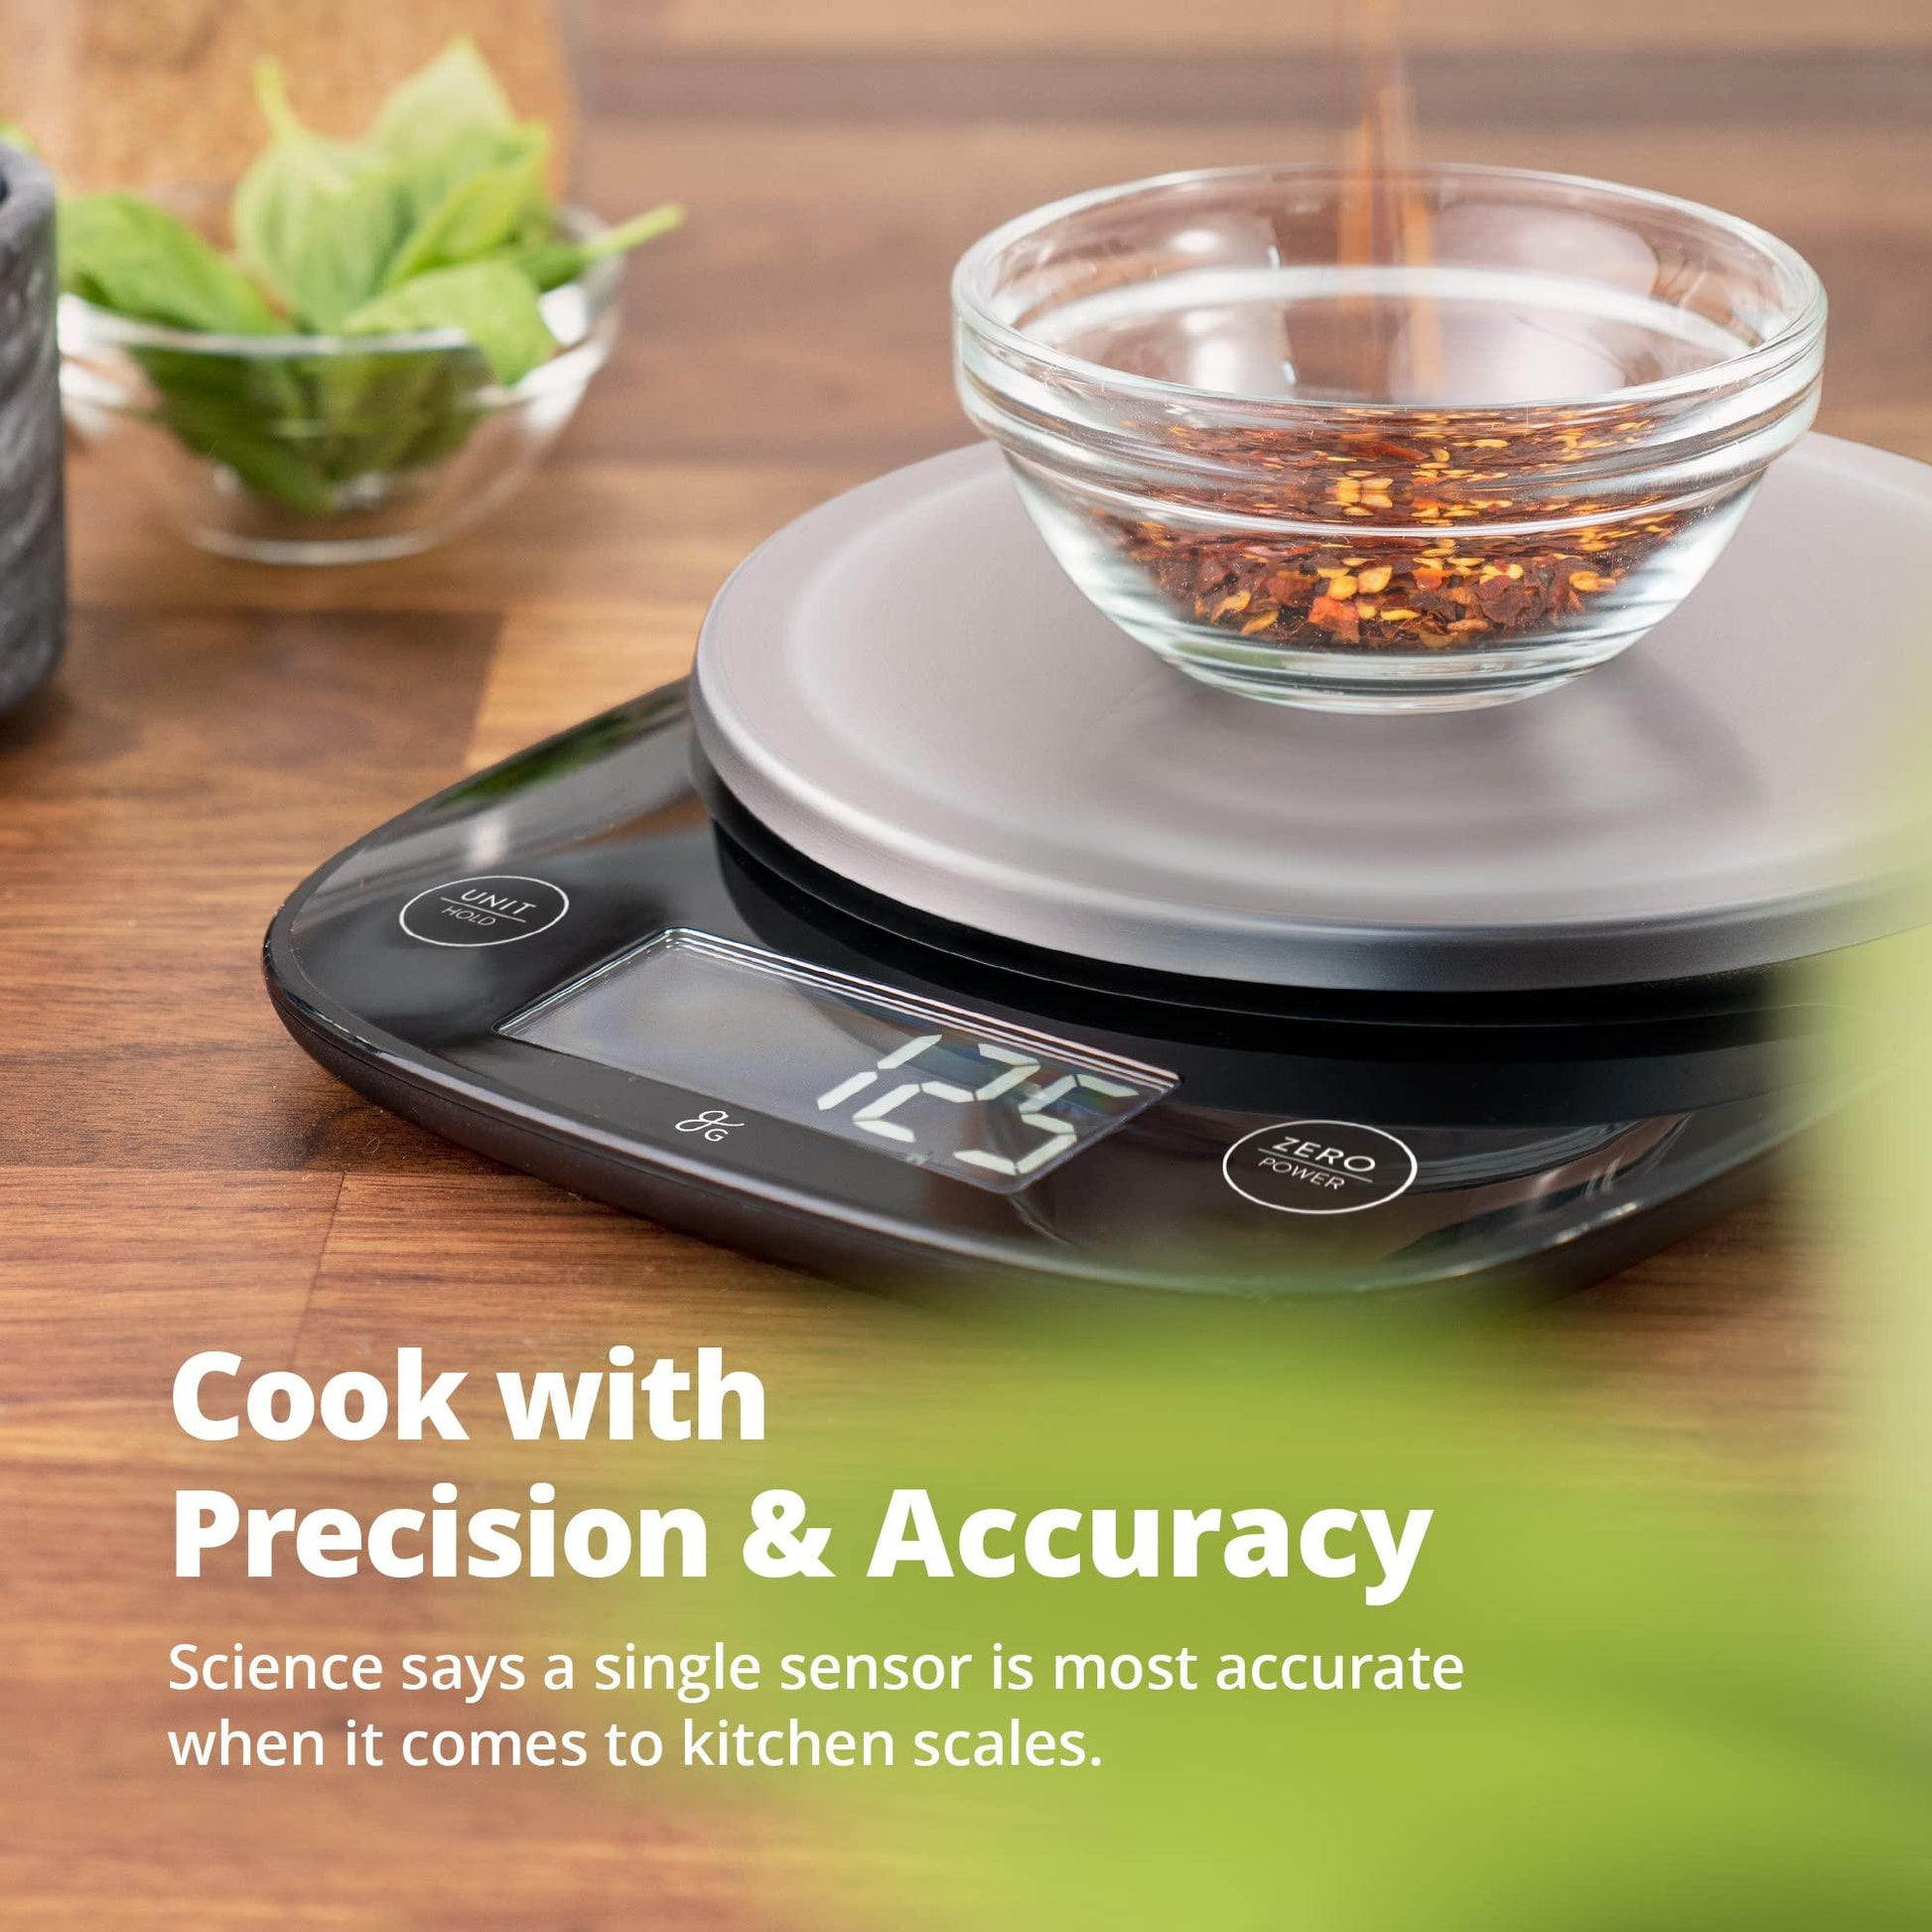 Greater Goods Premium Baking Scale, Ultra Accurate, Digital Kitchen Scale, Prep Baked Goods, Weigh Food and Coffee, or Use for Meal Prep, Four Units of Measurement, Designed in St. Louis - CookCave